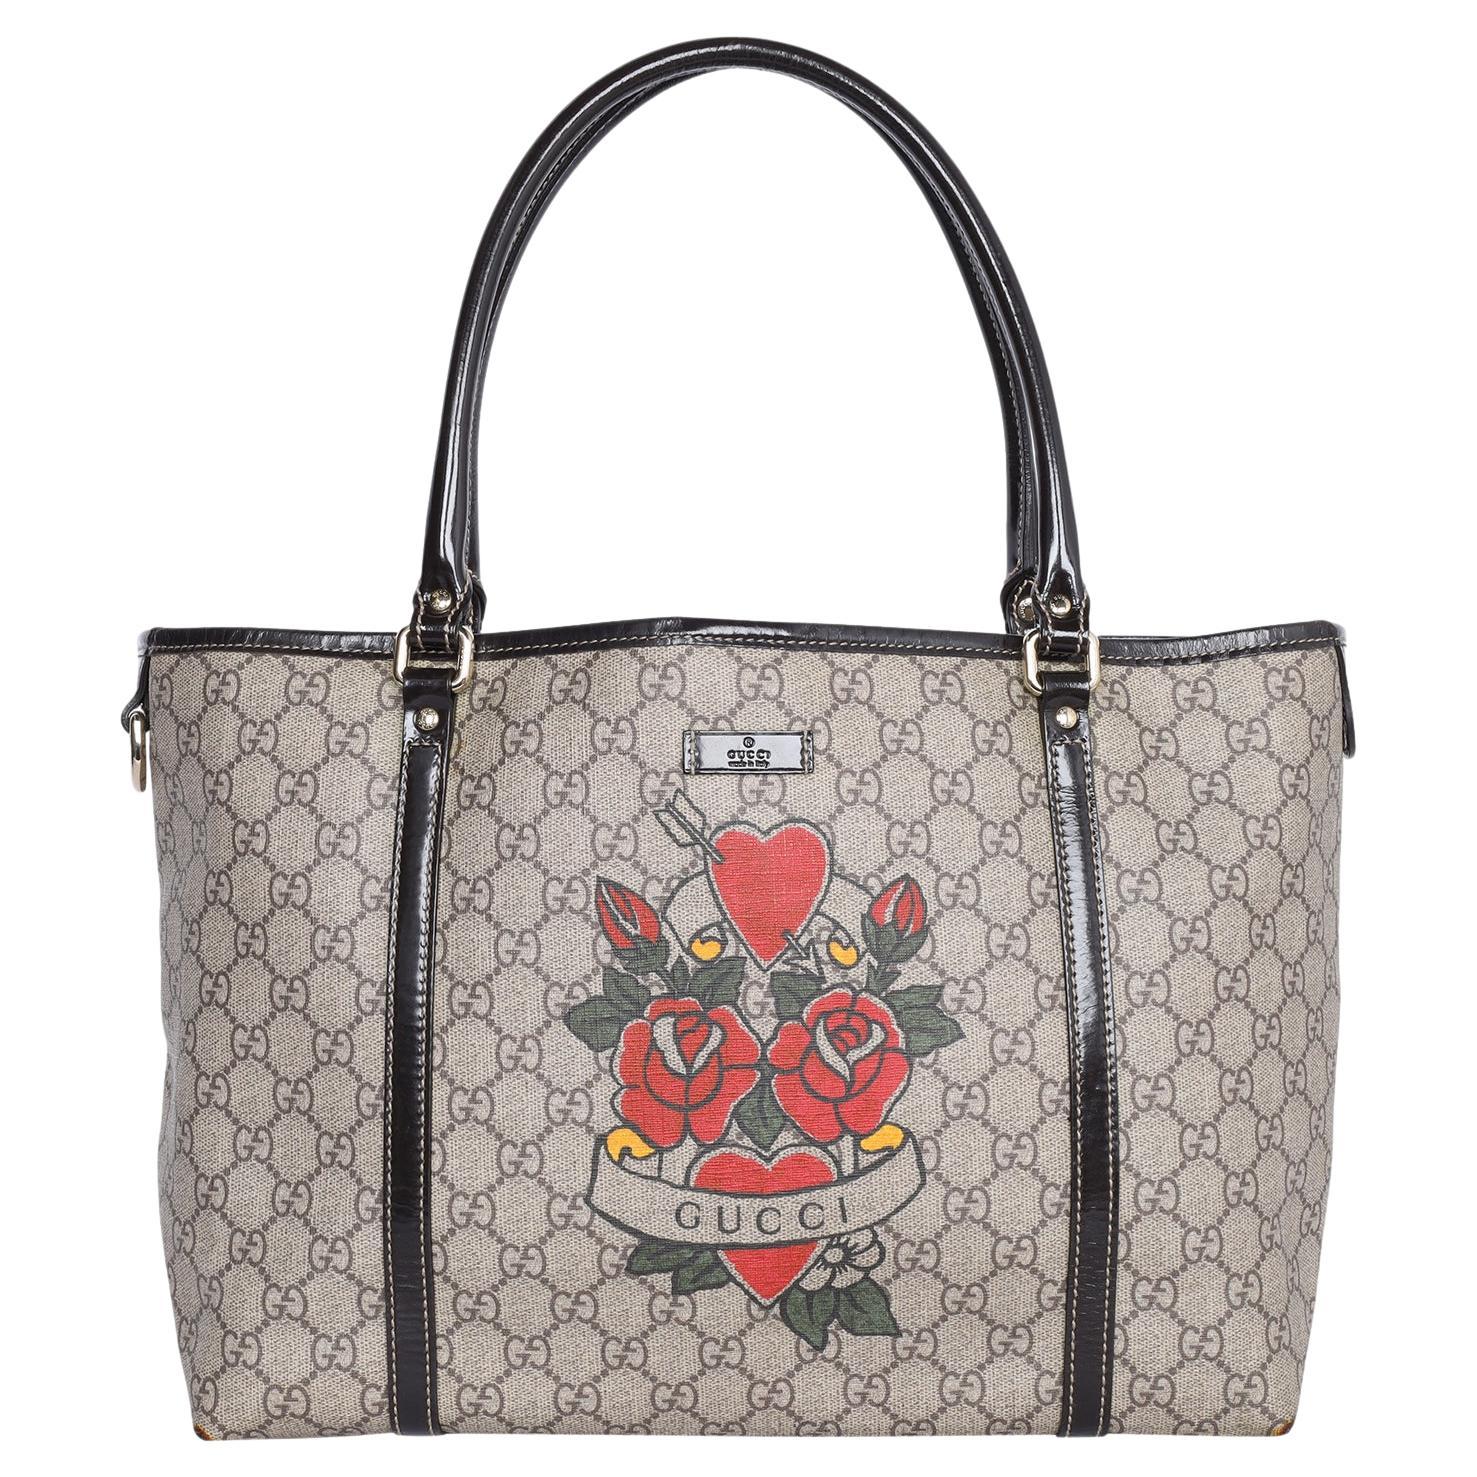 Authentic, pre-loved adorable Gucci Heart Tattoo tote from the Gucci heart tattoo collection. This tote bag perfectly blends Gucci’s timeless and iconic style. This tote features Gucci’s classic GG Supreme canvas and patent leather in beige & dark